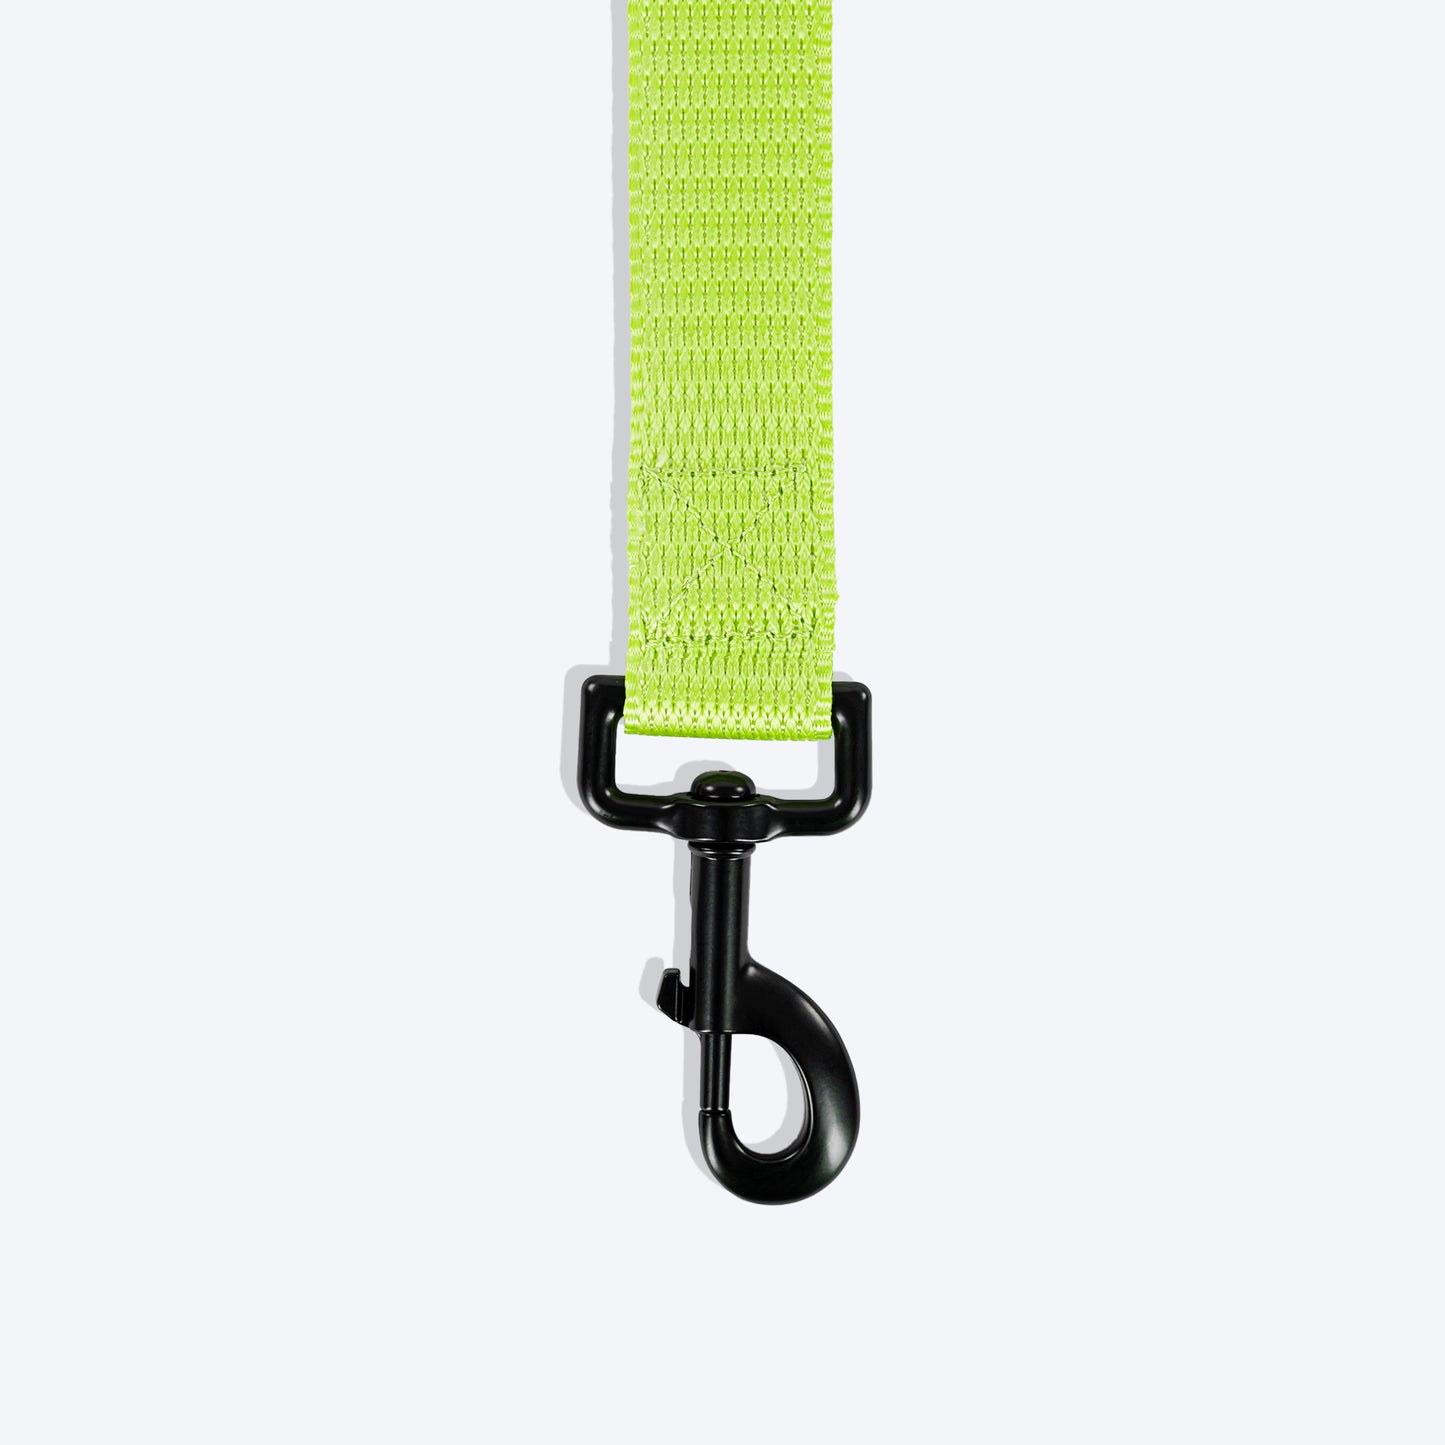 HUFT Basics Dog Leash - Neon Green - Heads Up For Tails